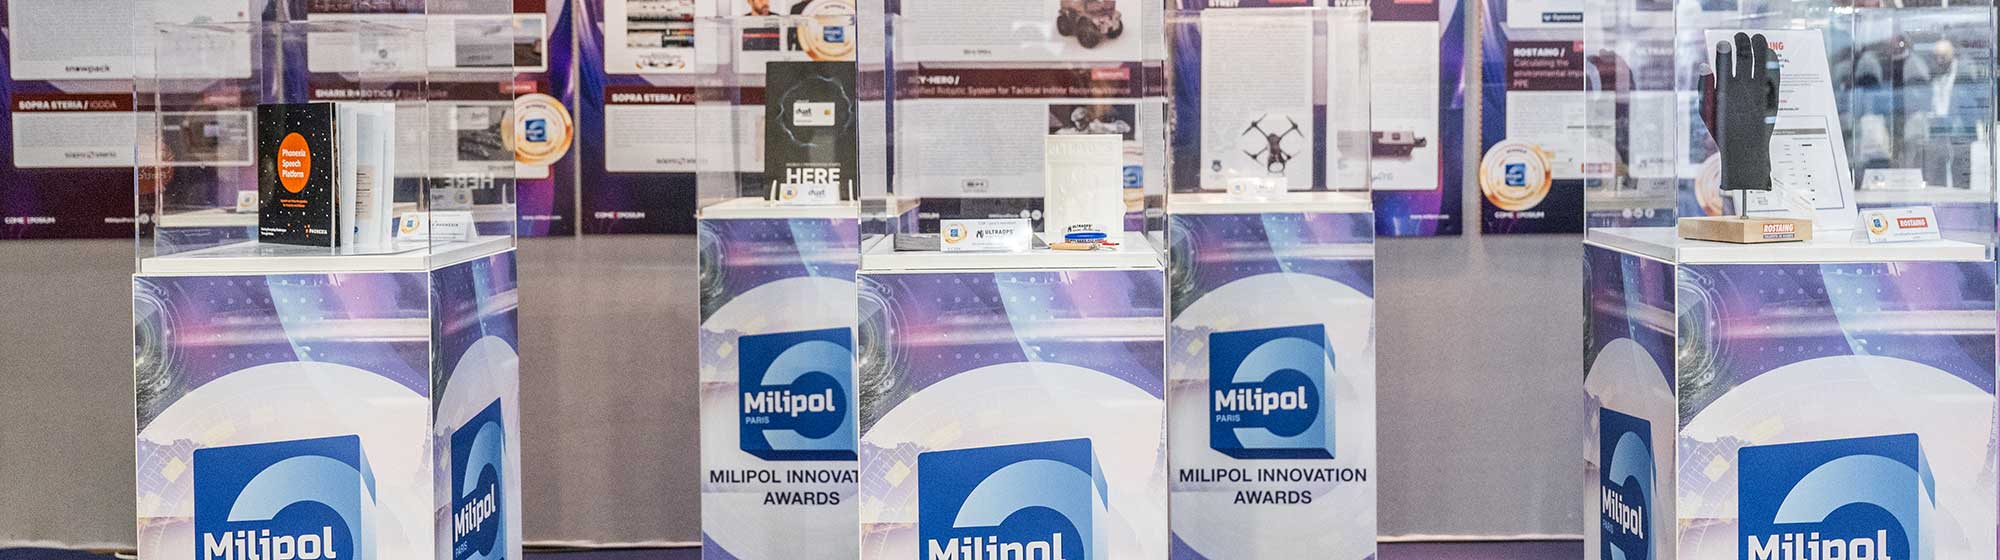 Milipol Innovation Awards winning products displayed by category